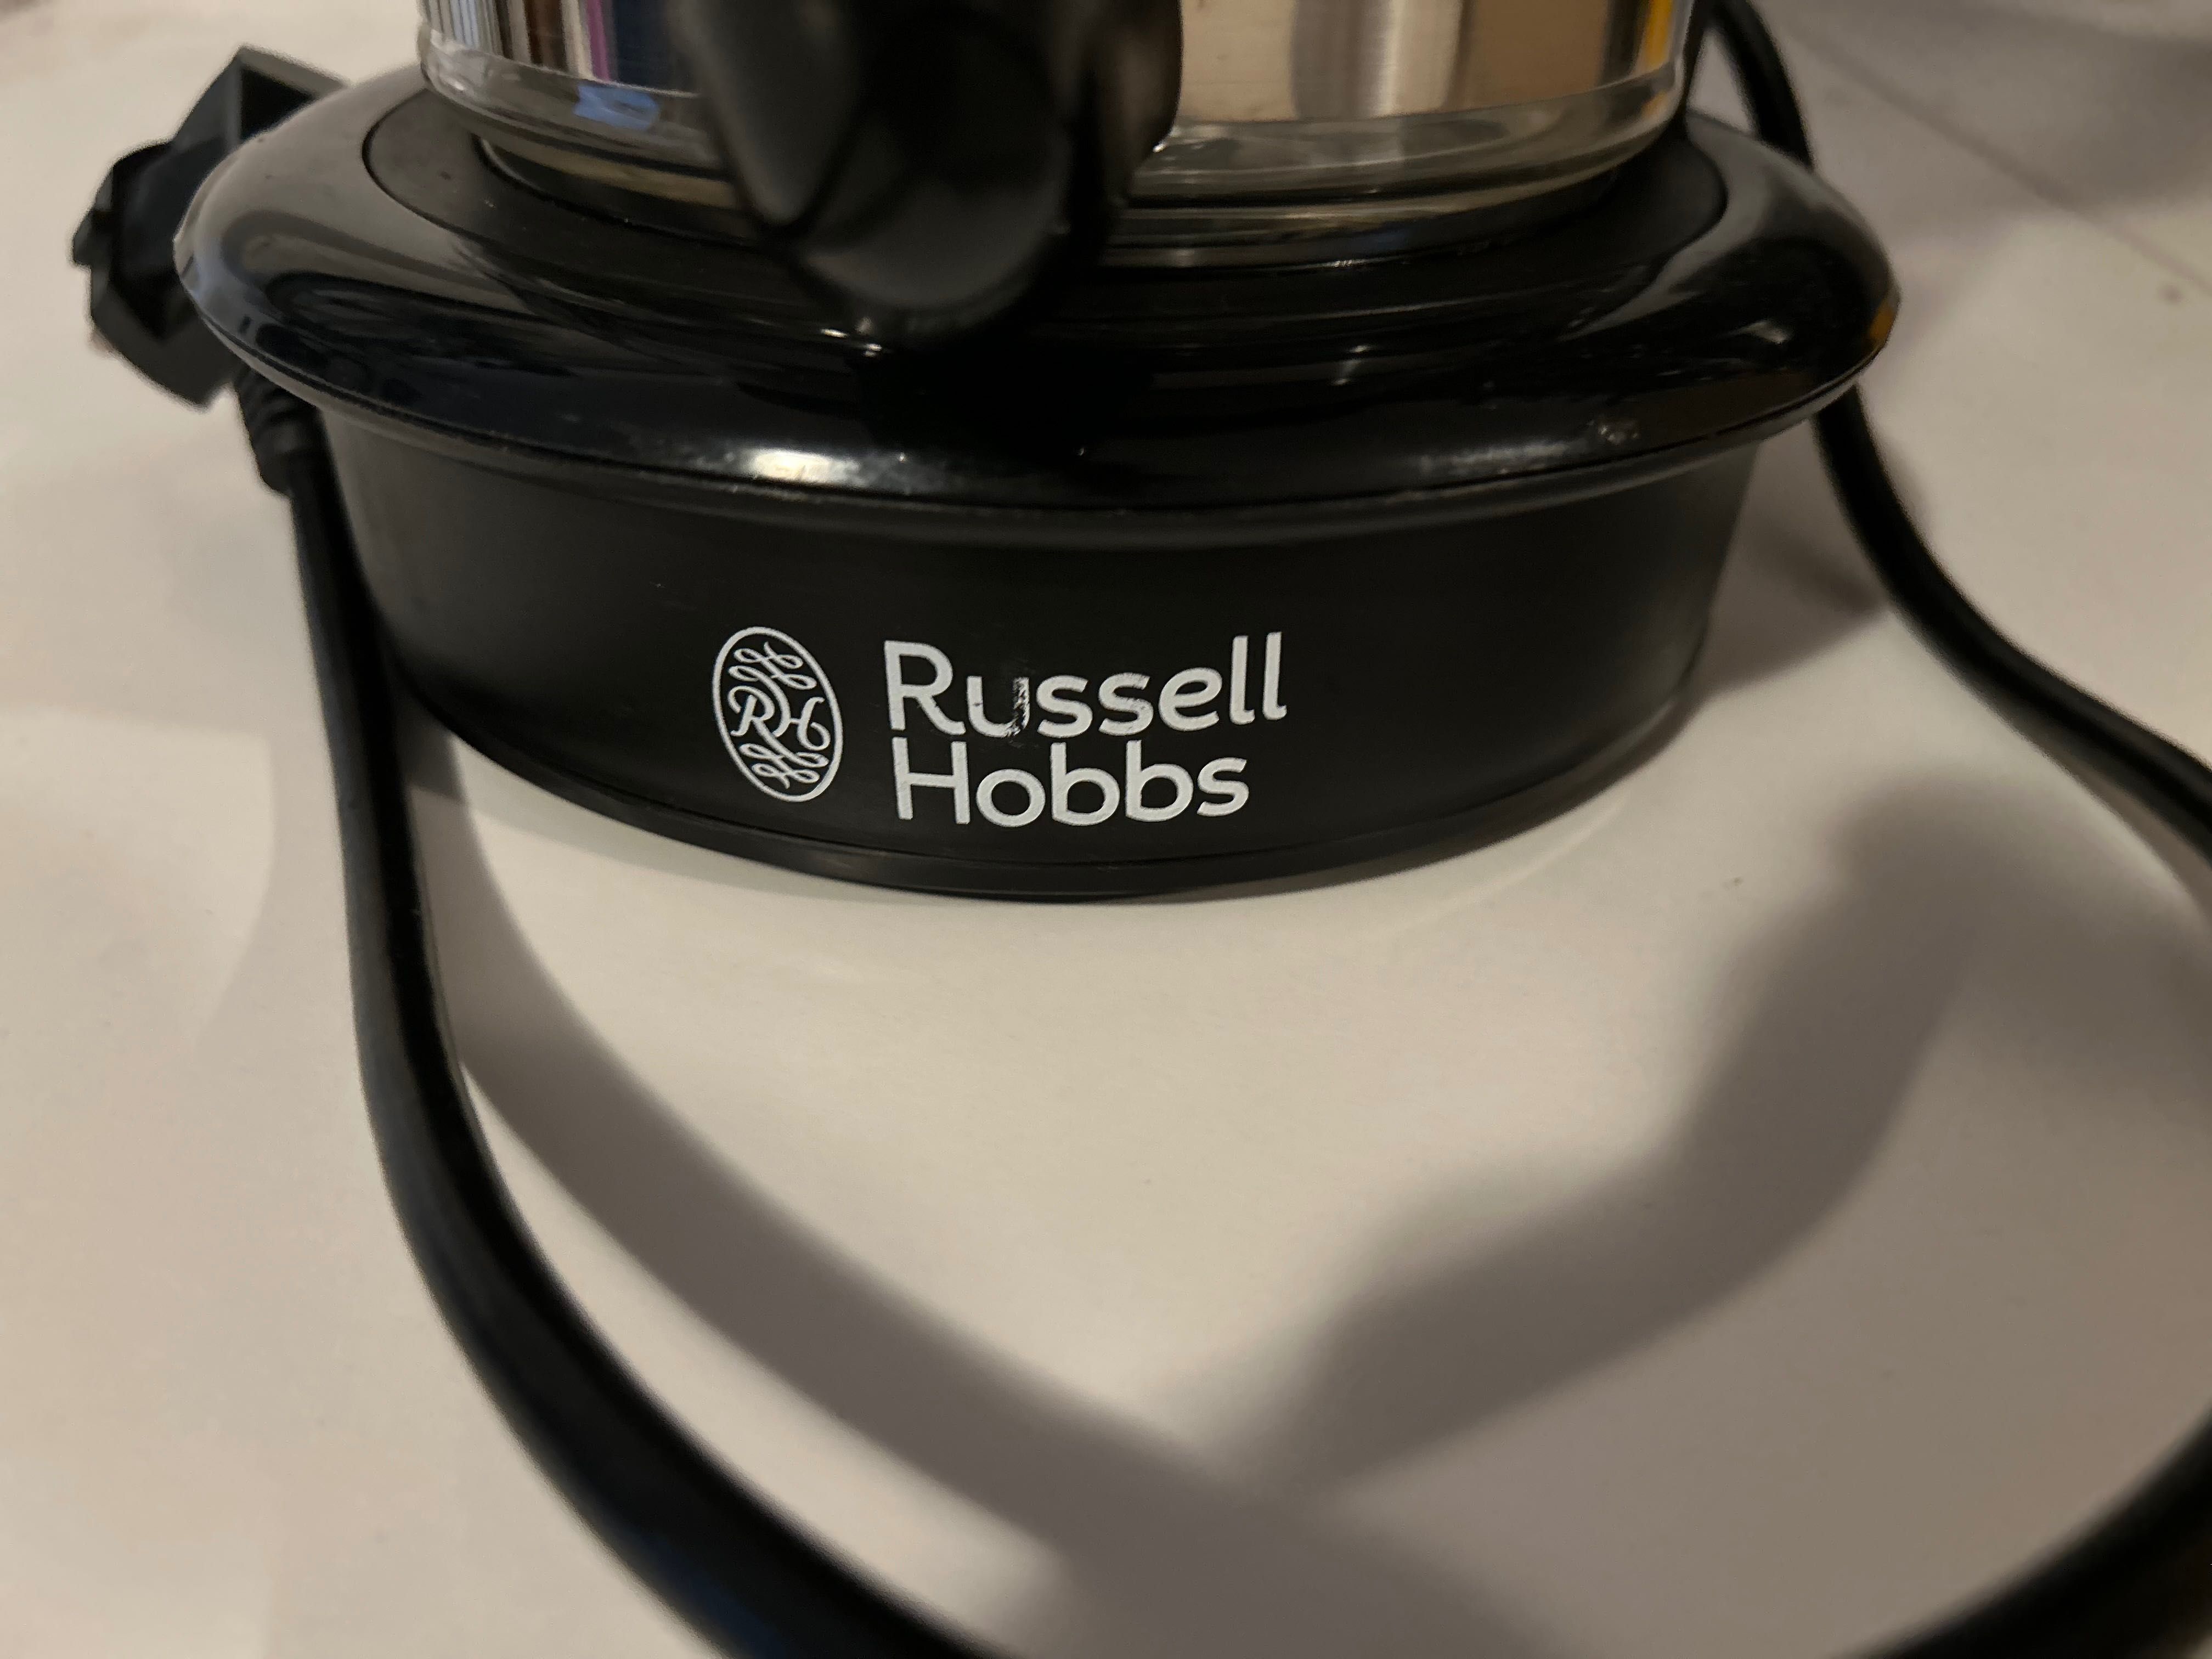 Cafetiera digitala Russell Hobbs Chester 20150-56, 1000 W